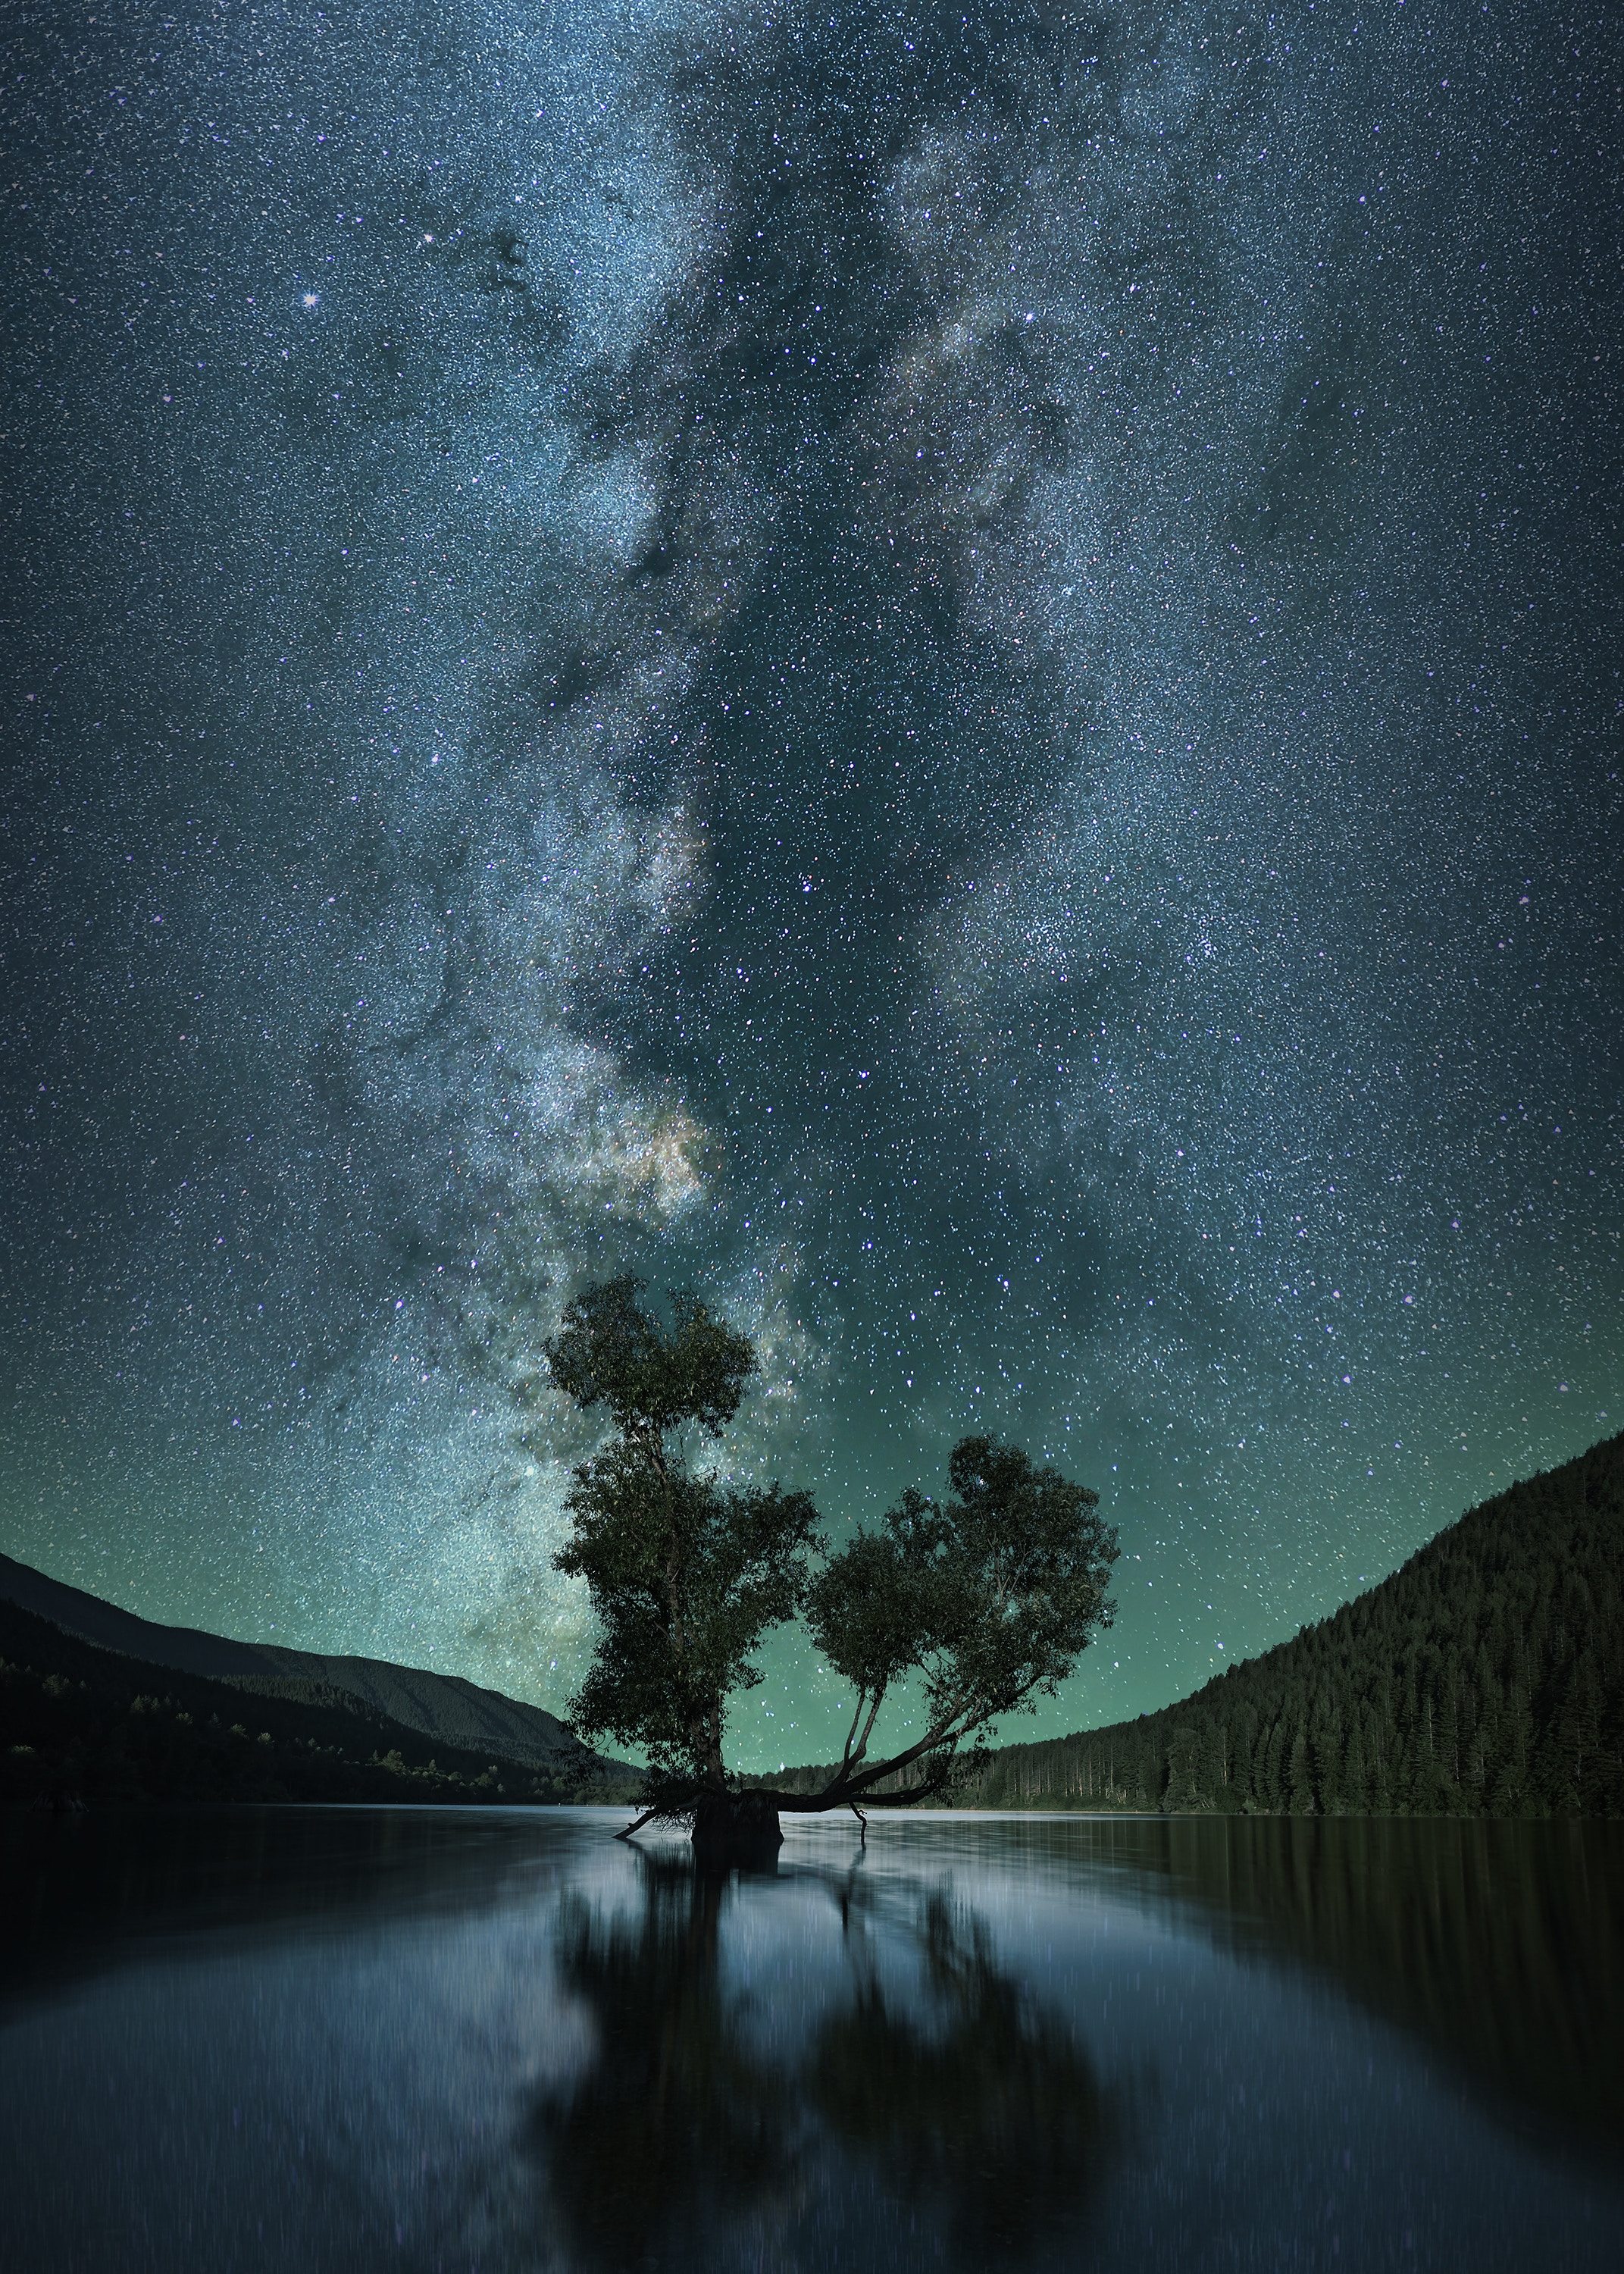 astrophotography wallpaper,sky,nature,atmosphere,natural landscape,tree